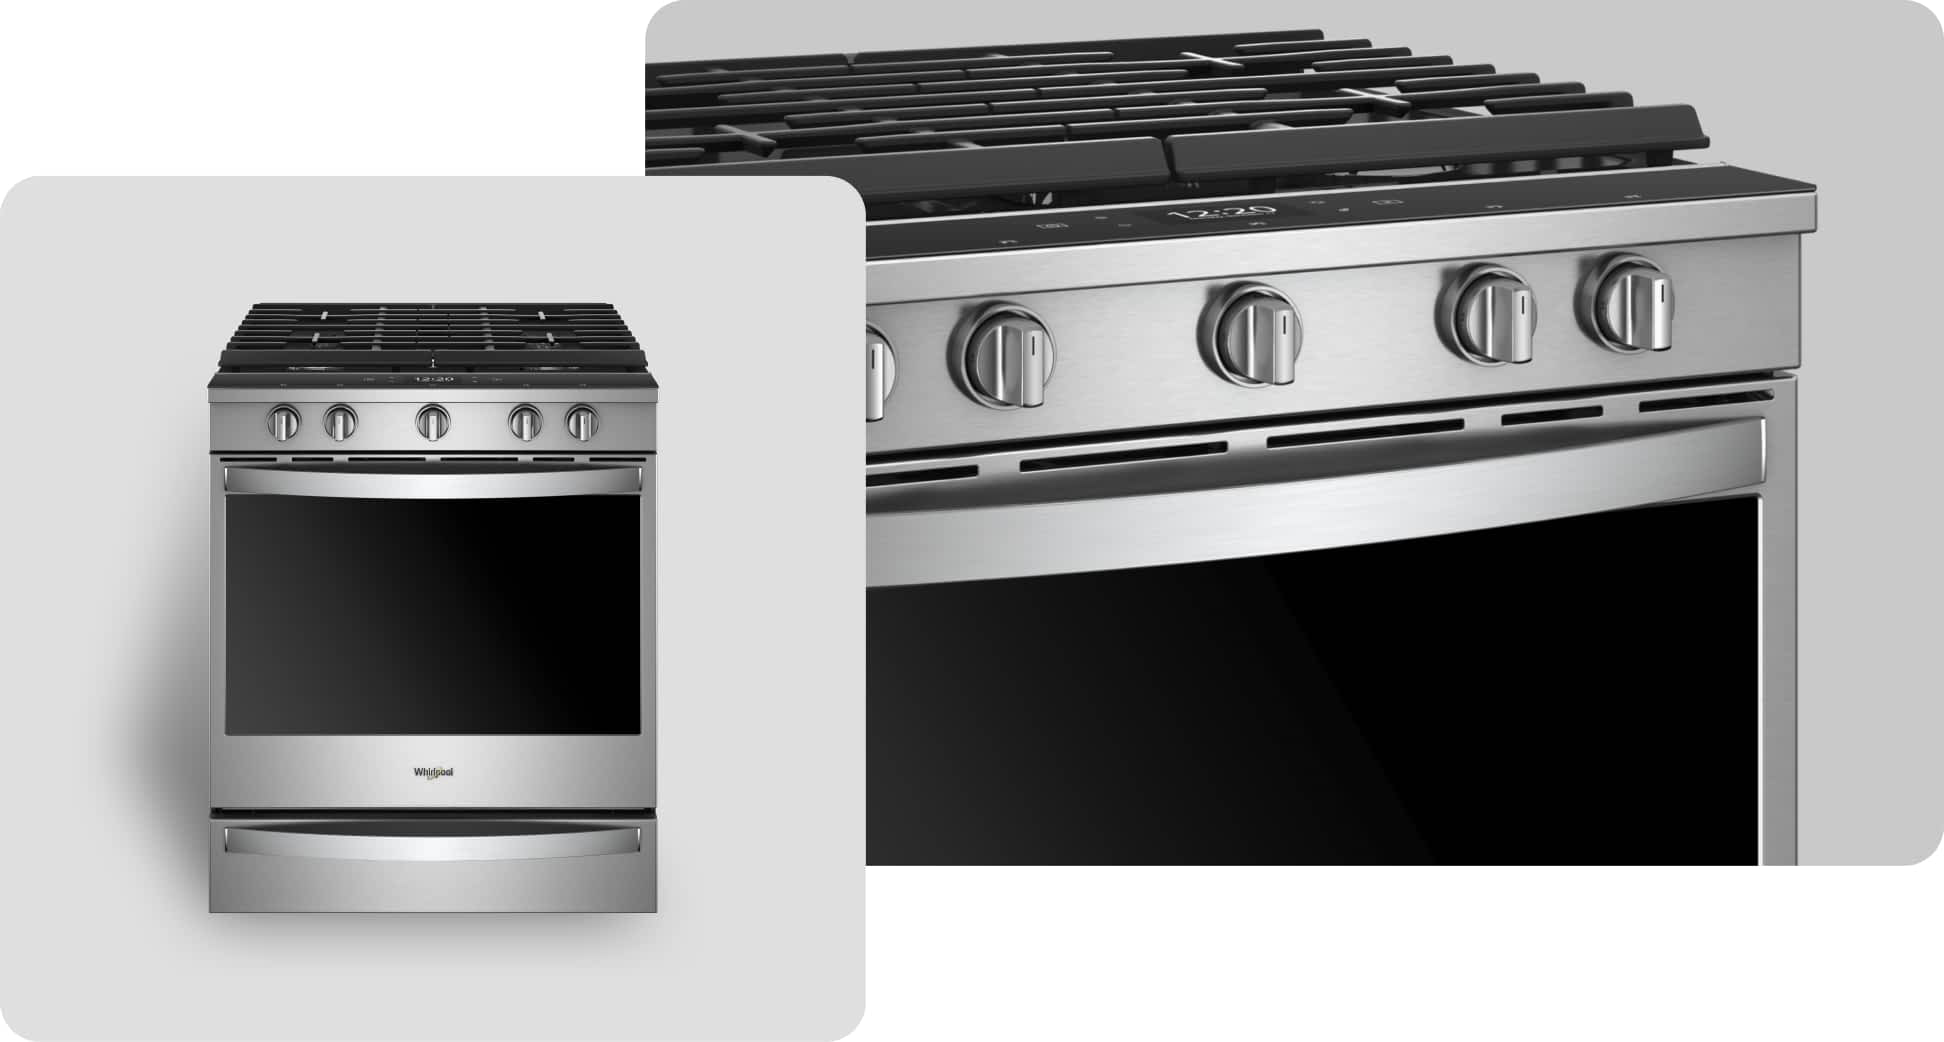 A Whirlpool® Range with a Fingerprint-Resistant Stainless Finish